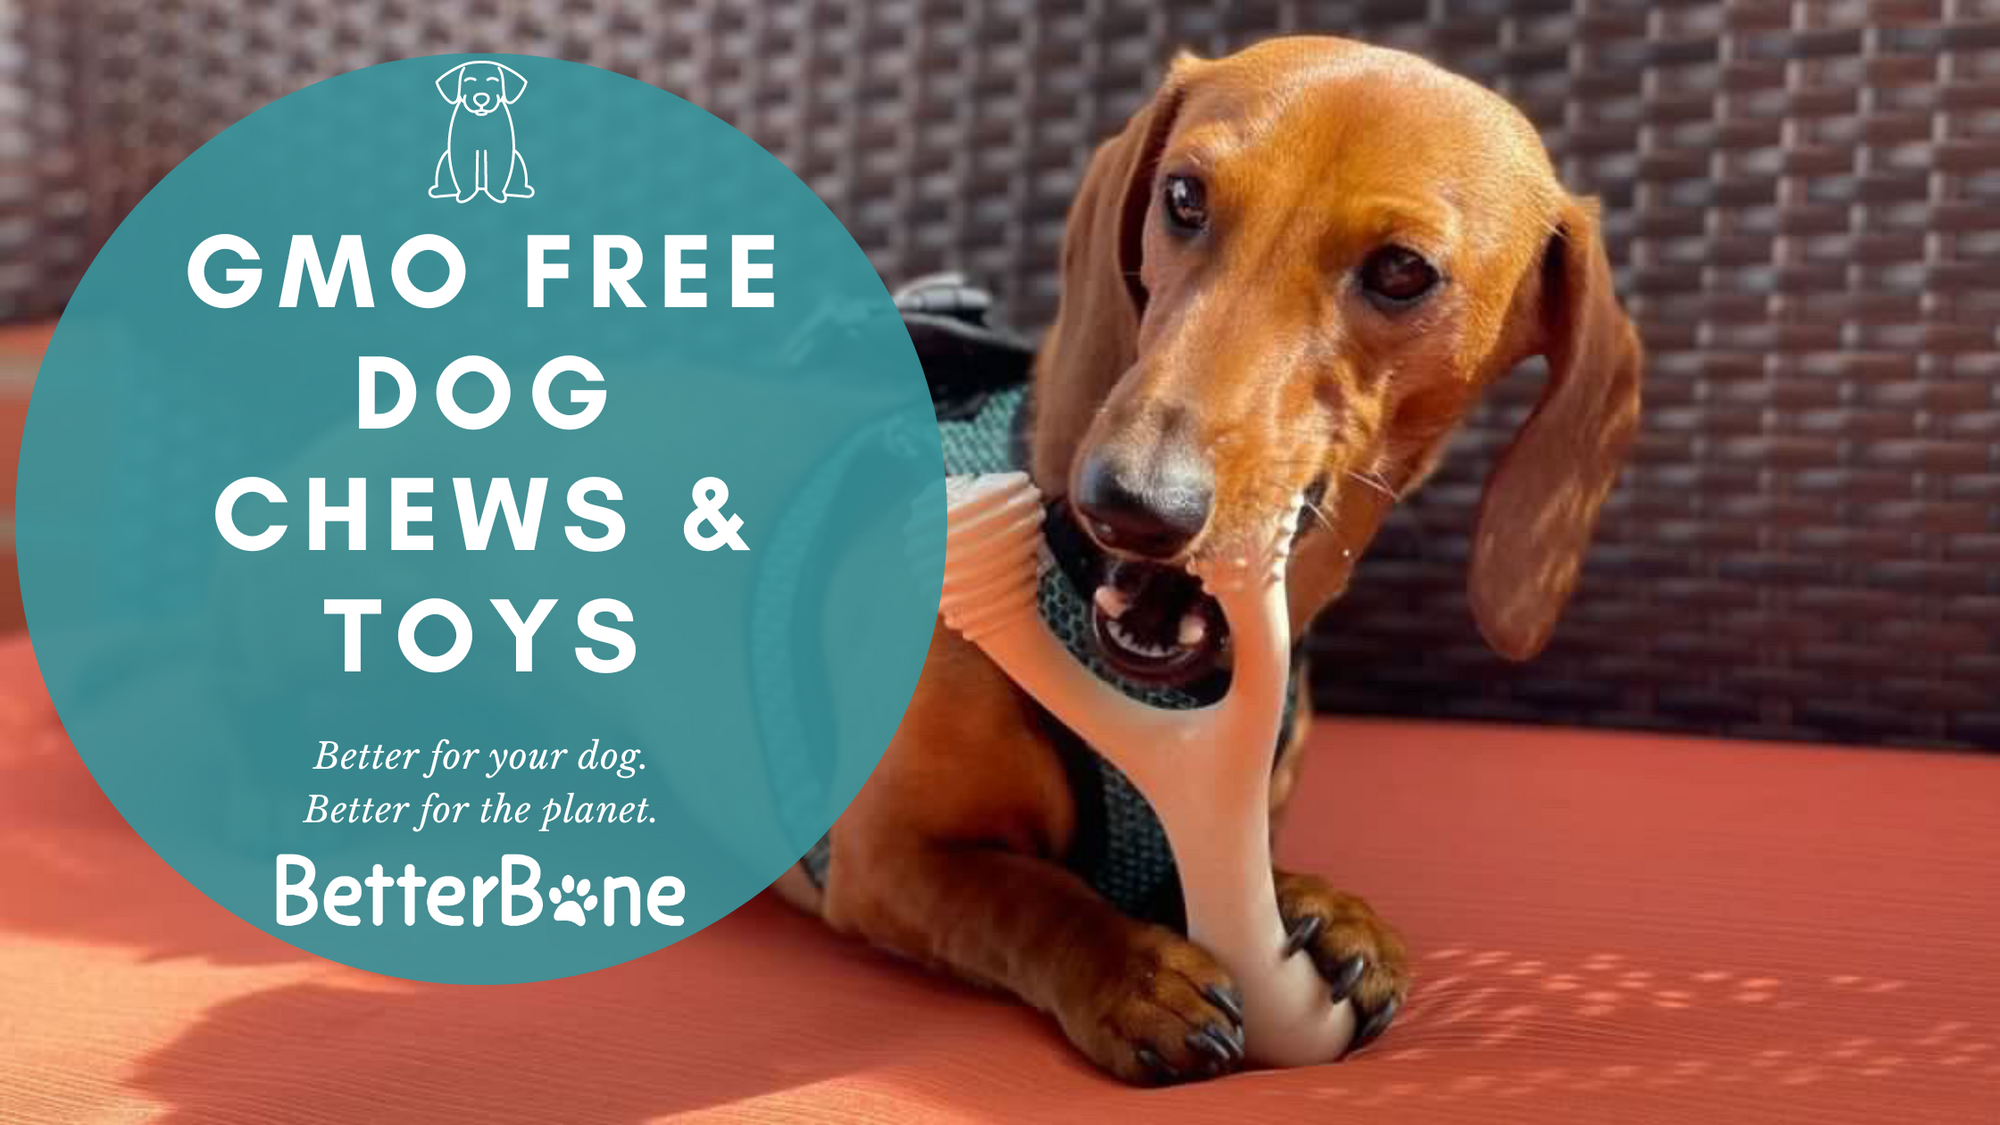 Going Natural: Discover the GMO-Free Difference with BetterBone's Dog Chew Toys